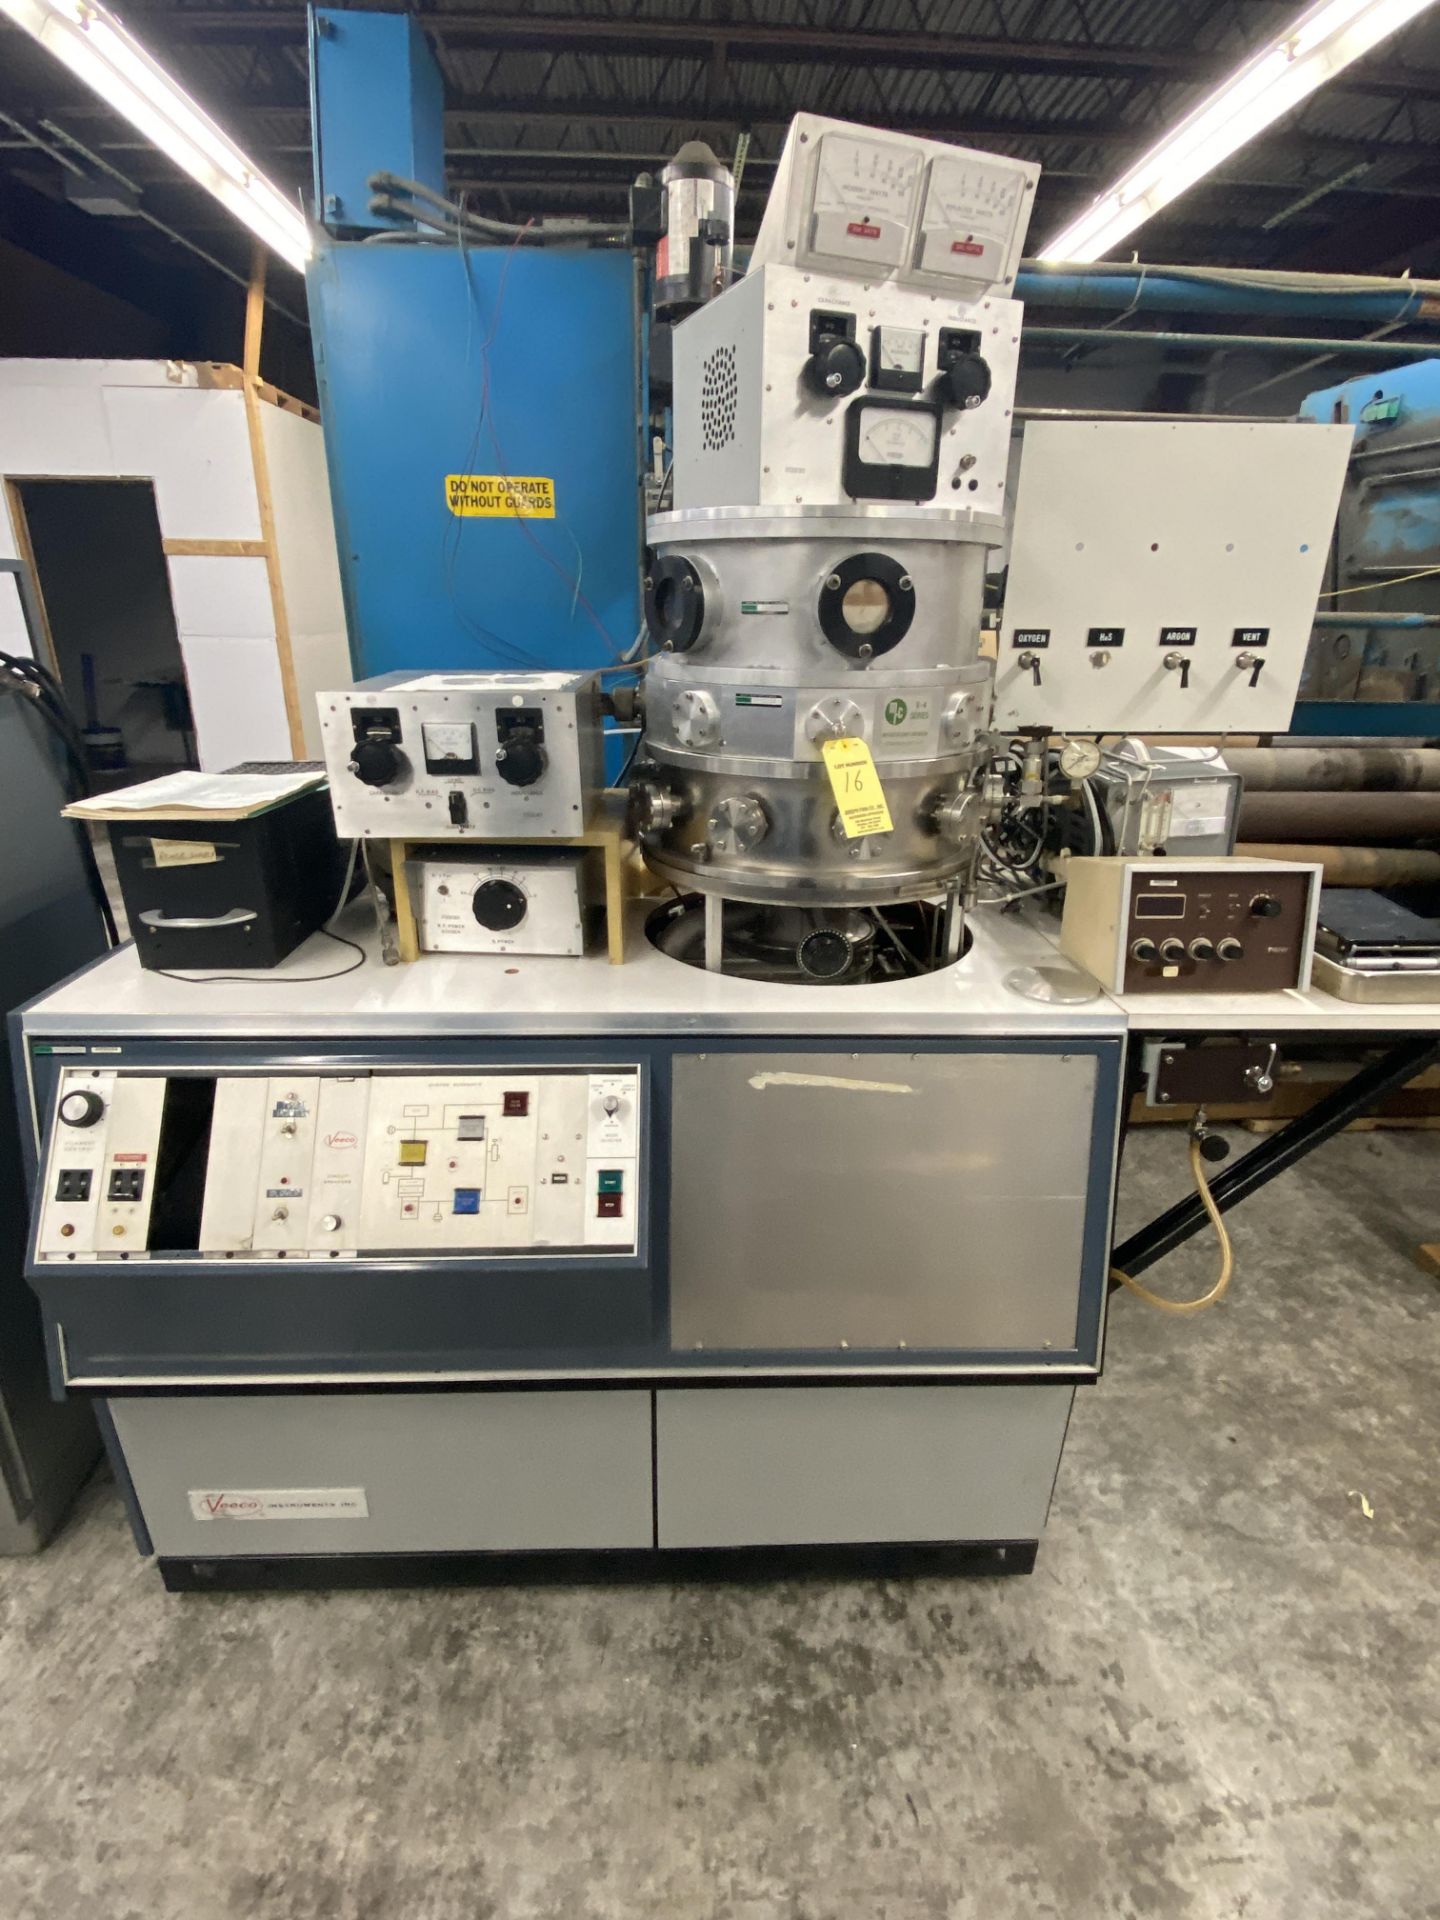 Veeco Instruments Sputtering Vacuum Metallizer with MRC V-4 Chamber, Inficon XTC, Veeco RG 1000 - Image 2 of 12